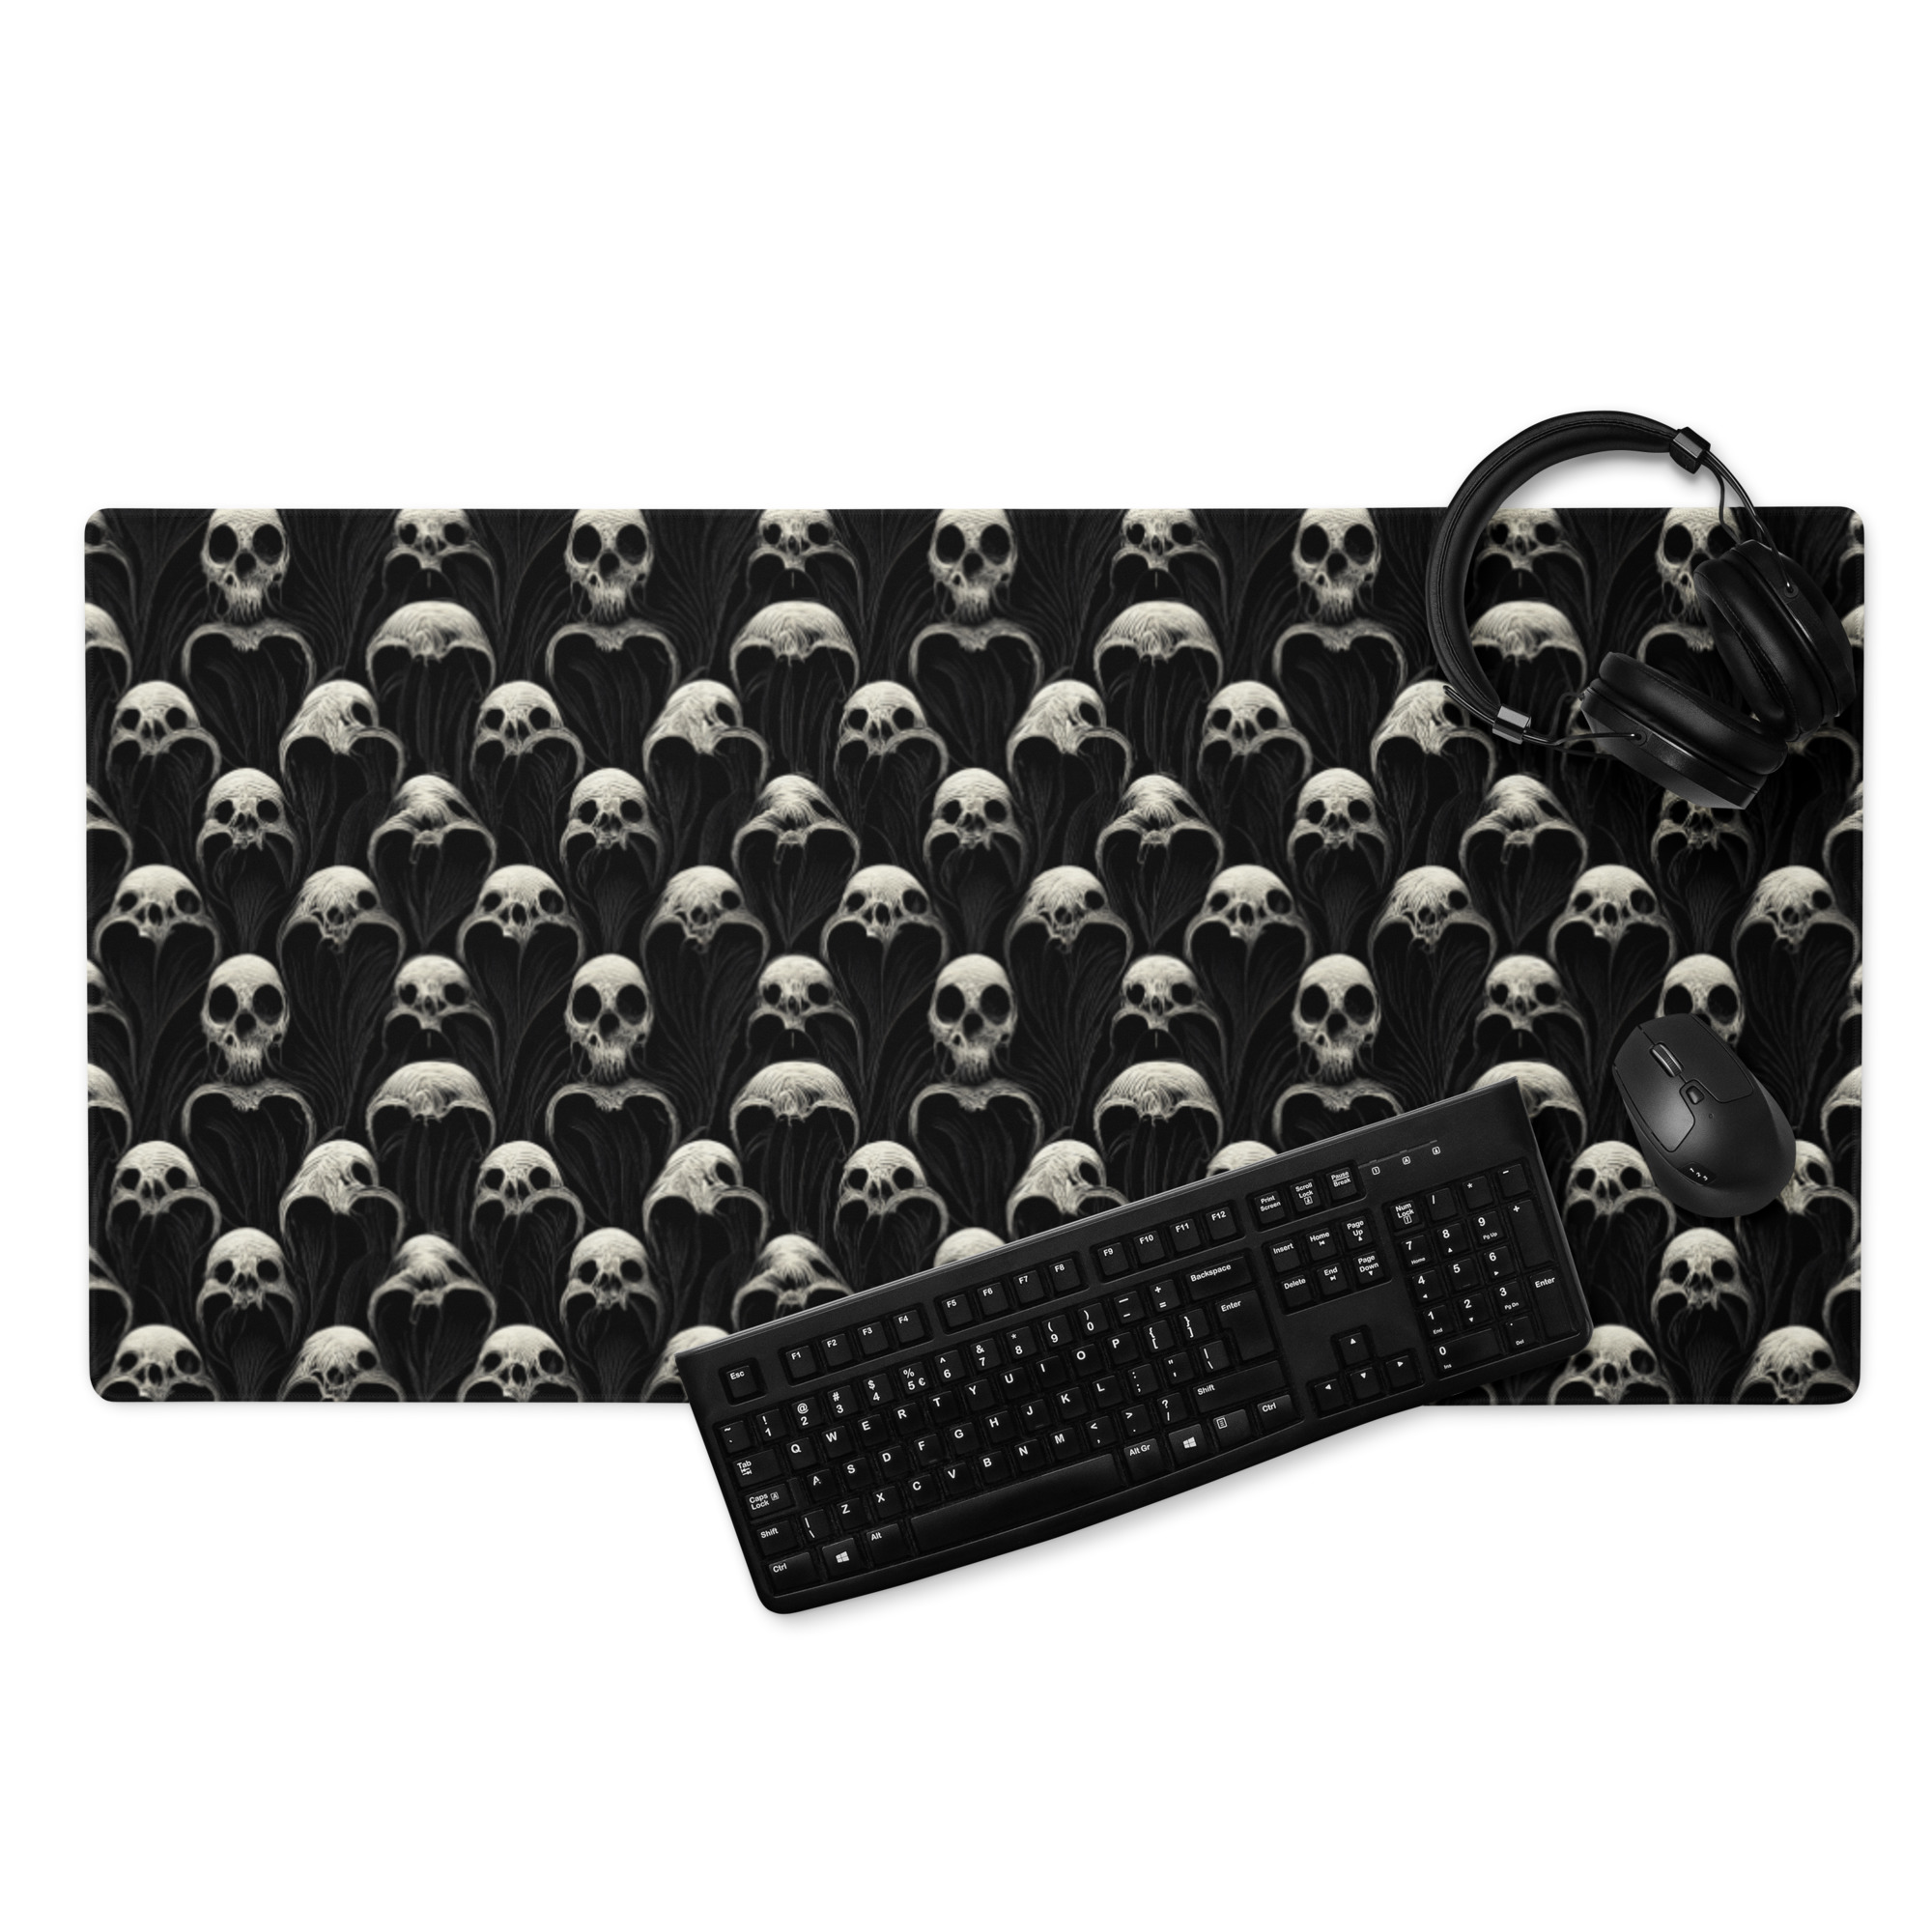 Featured image for “Demented skulls - Gaming mouse pad”